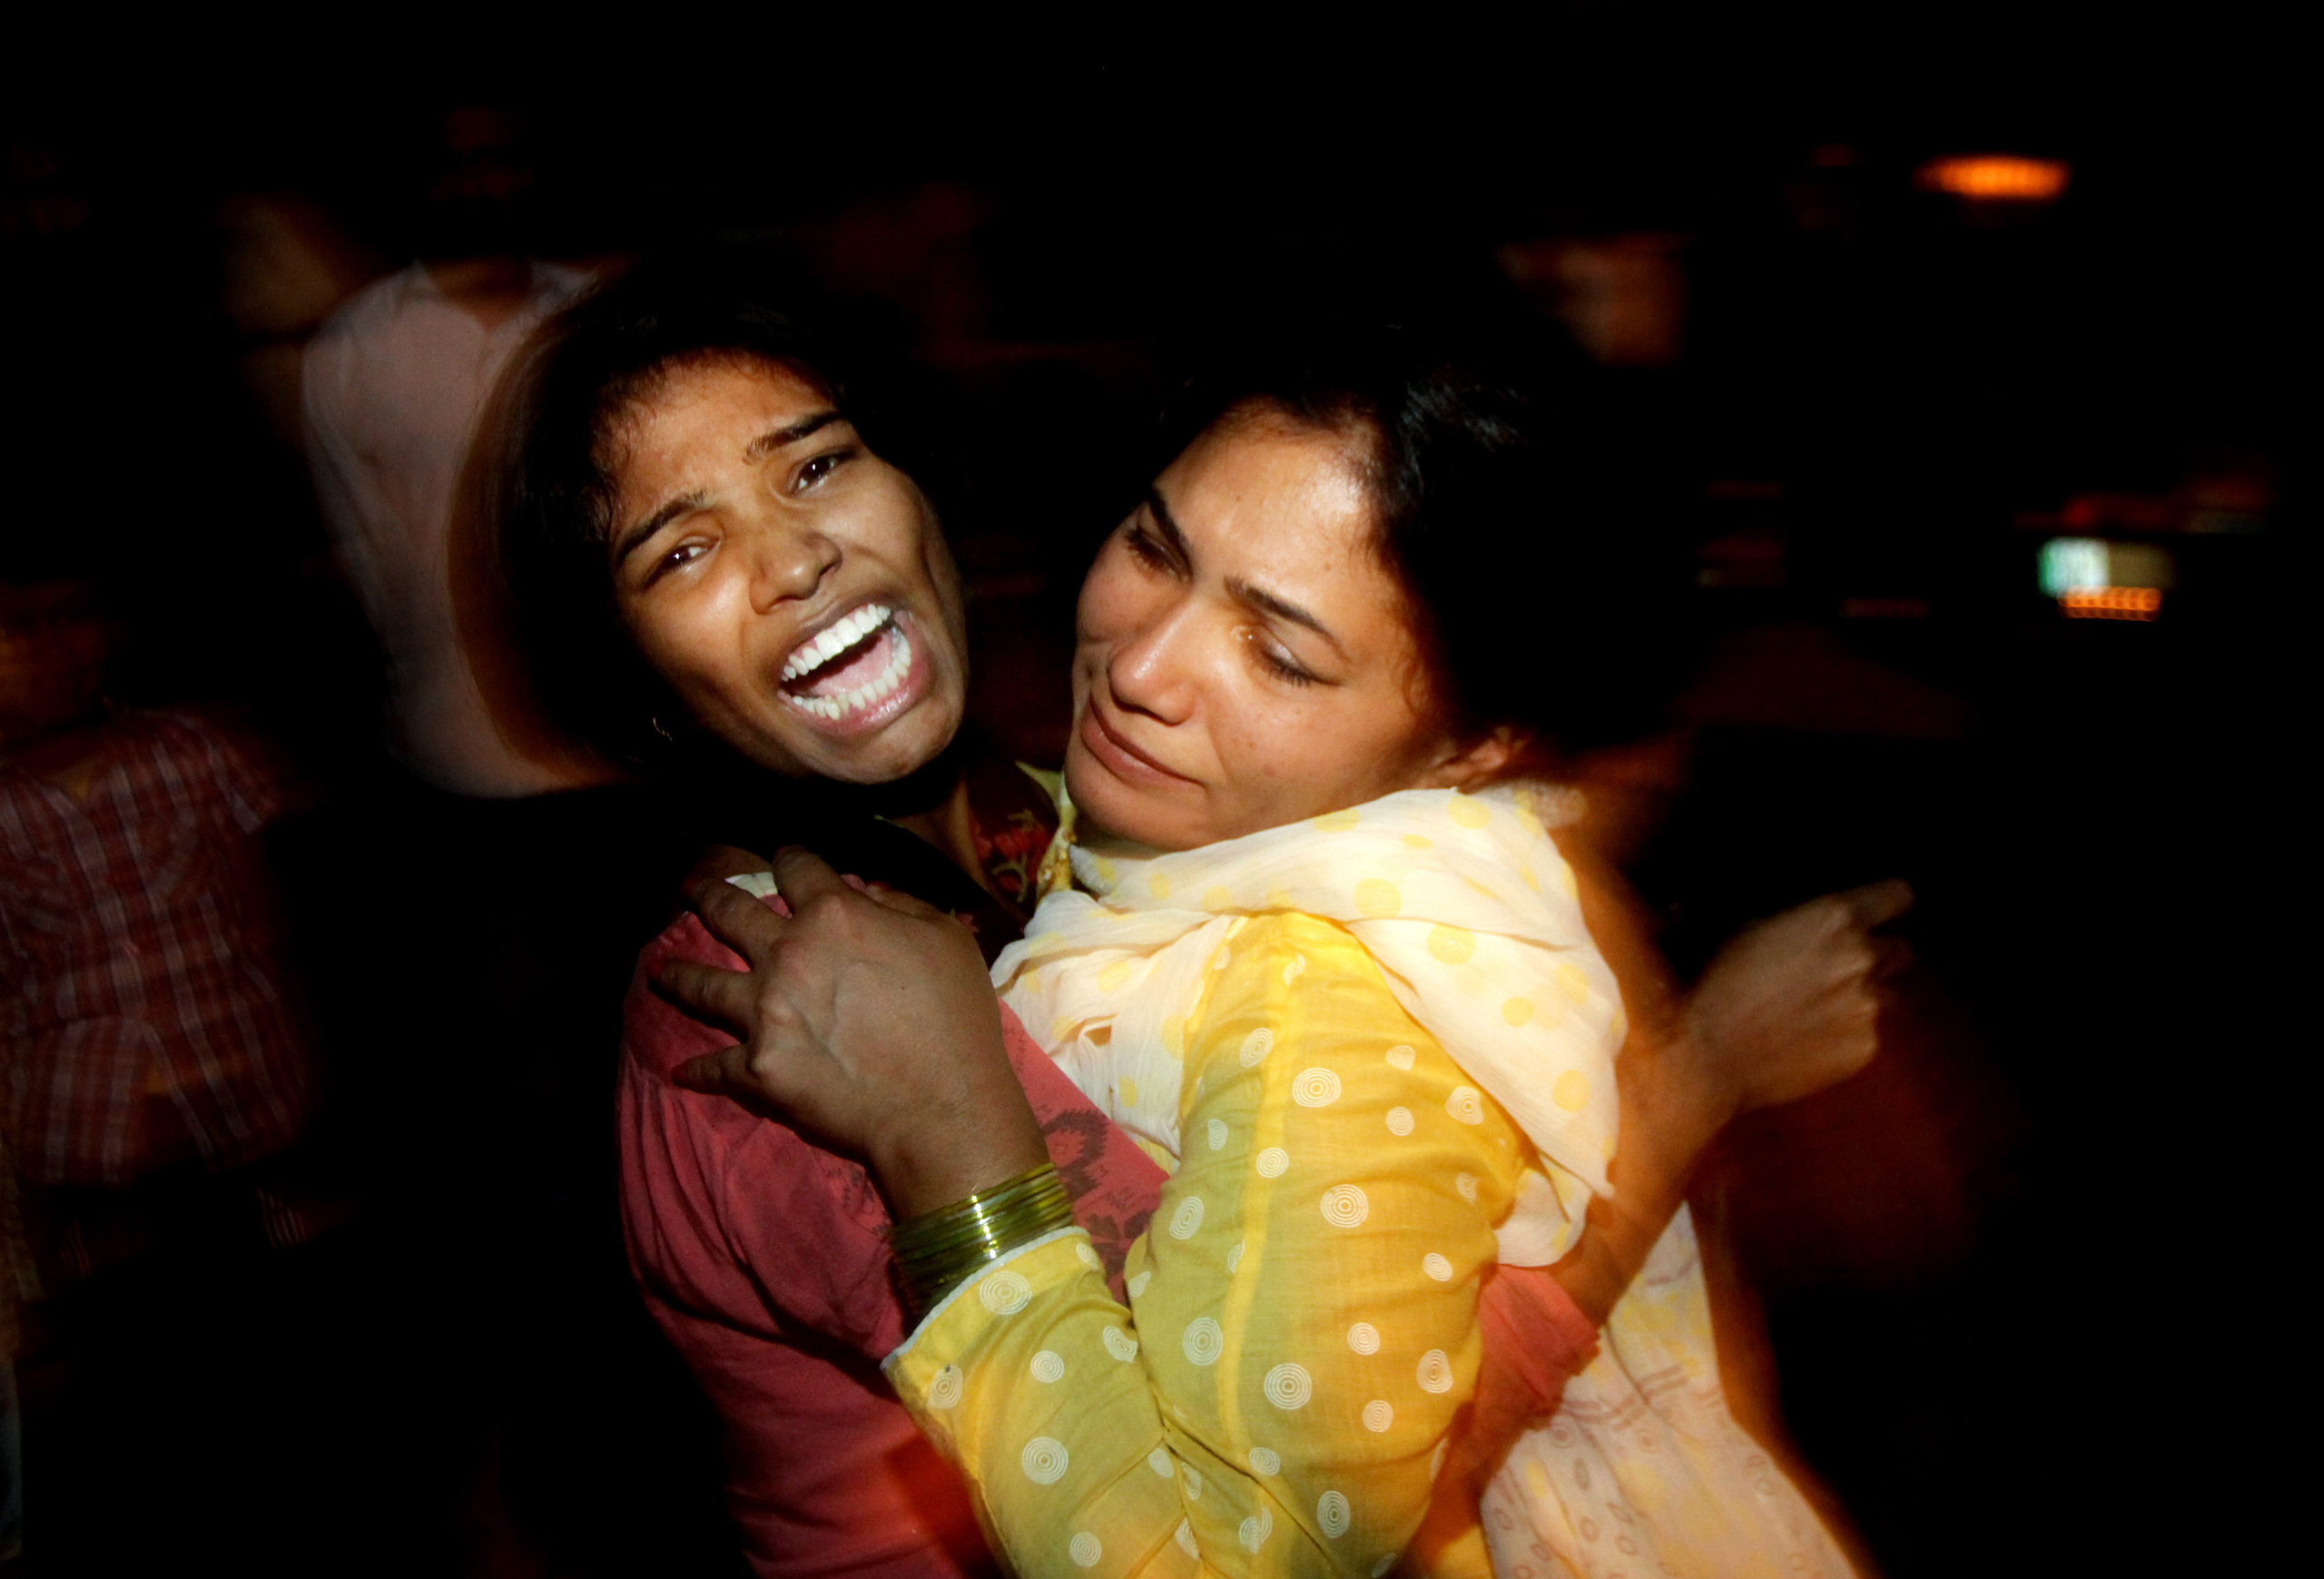 Women comfort each other as they mourn over the death of a family member who was killed in a bomb blast, at a local hospital in Lahore, Pakistan, on March, 27, 2016. (K.M. Chaudary—AP)